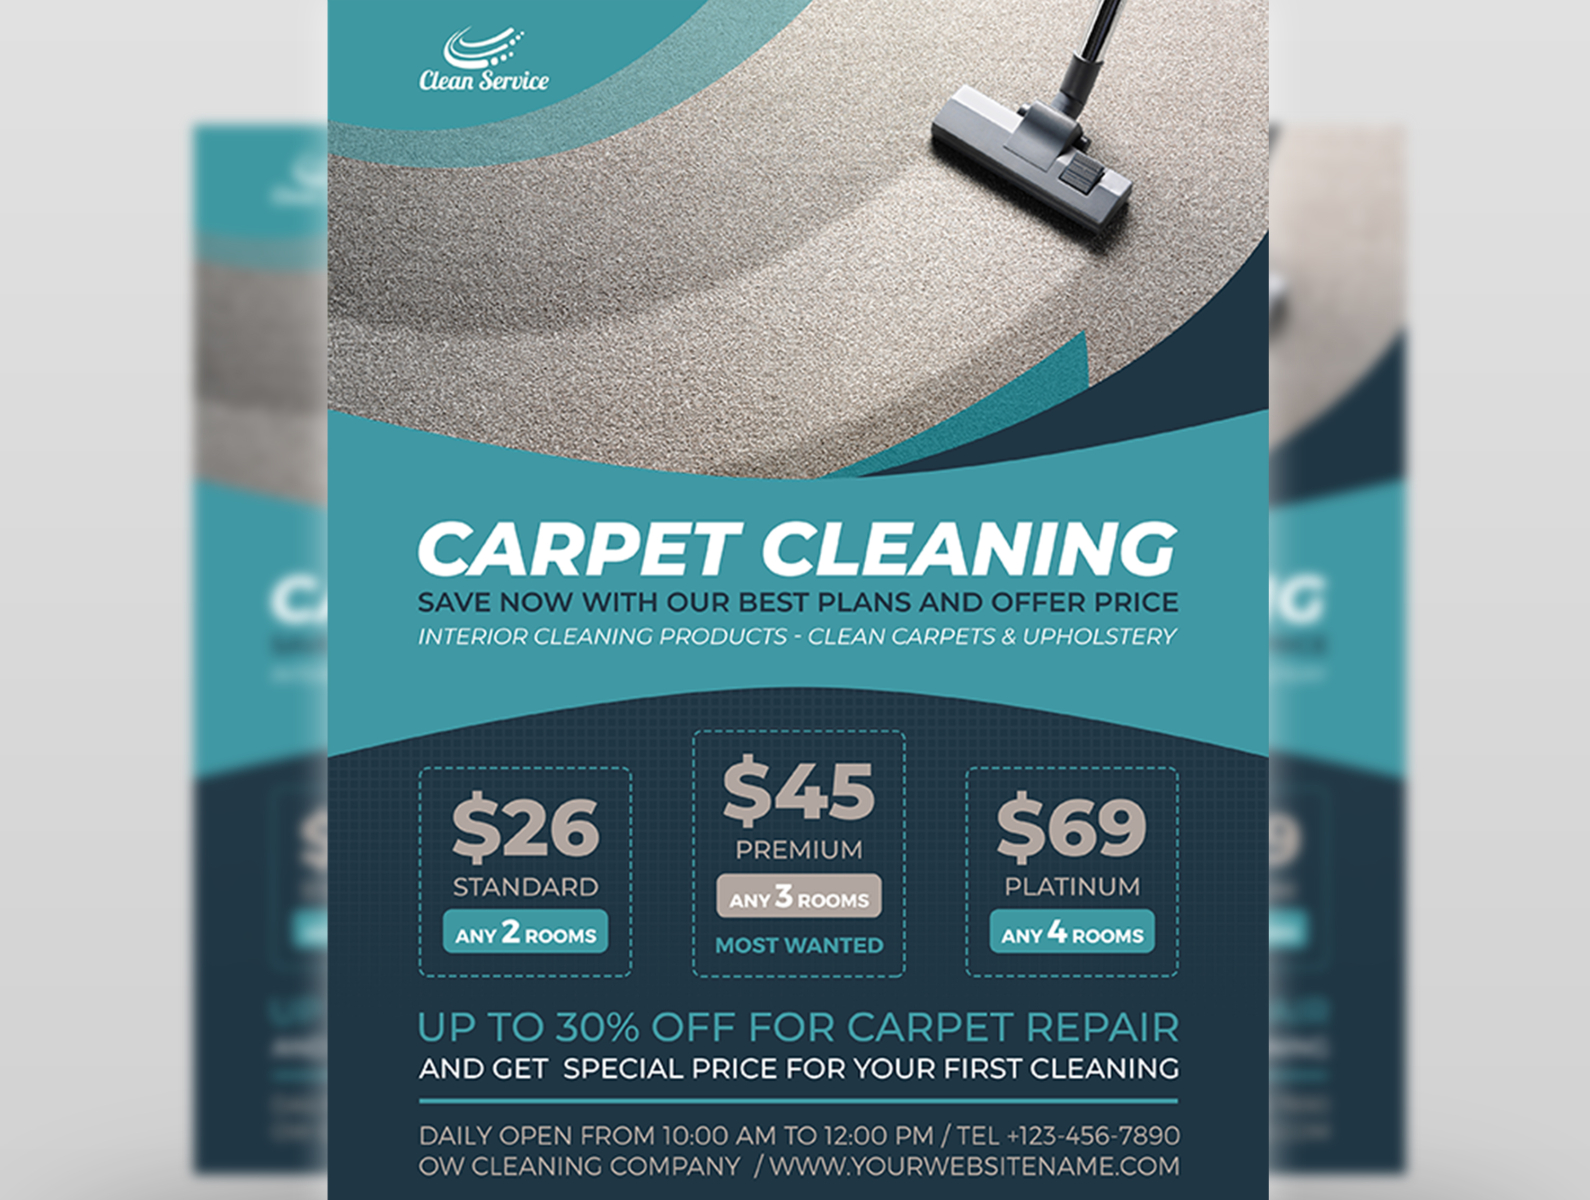 Carpet Cleaning Services Flyer Template by OWPictures on Dribbble